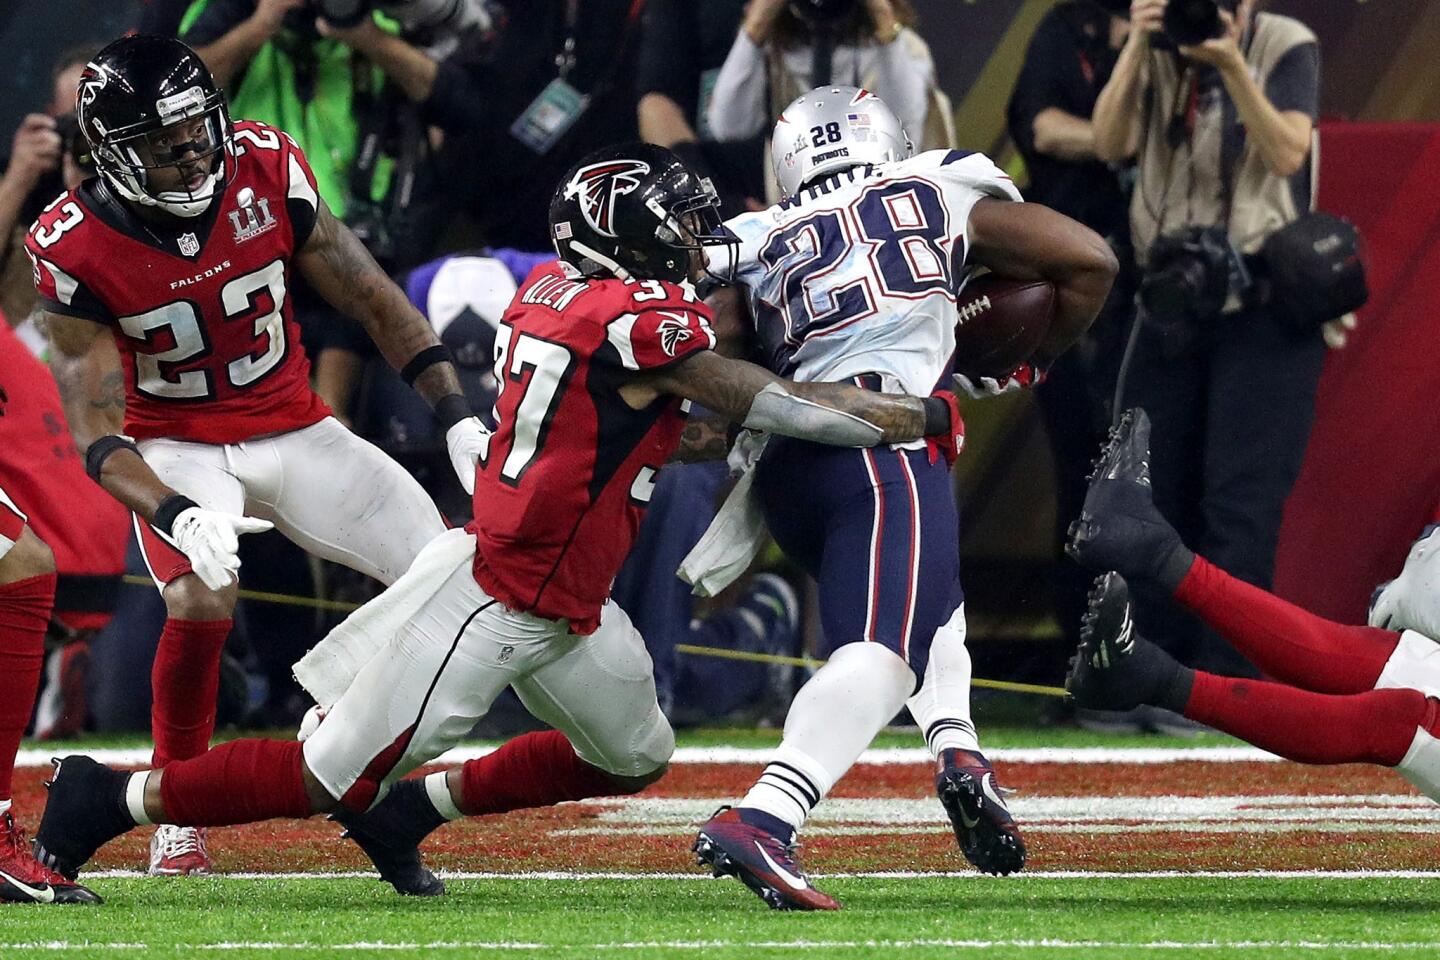 Patriots running back James White breaks a tackle attempt by Falcons defensive back Ricardo Allen to